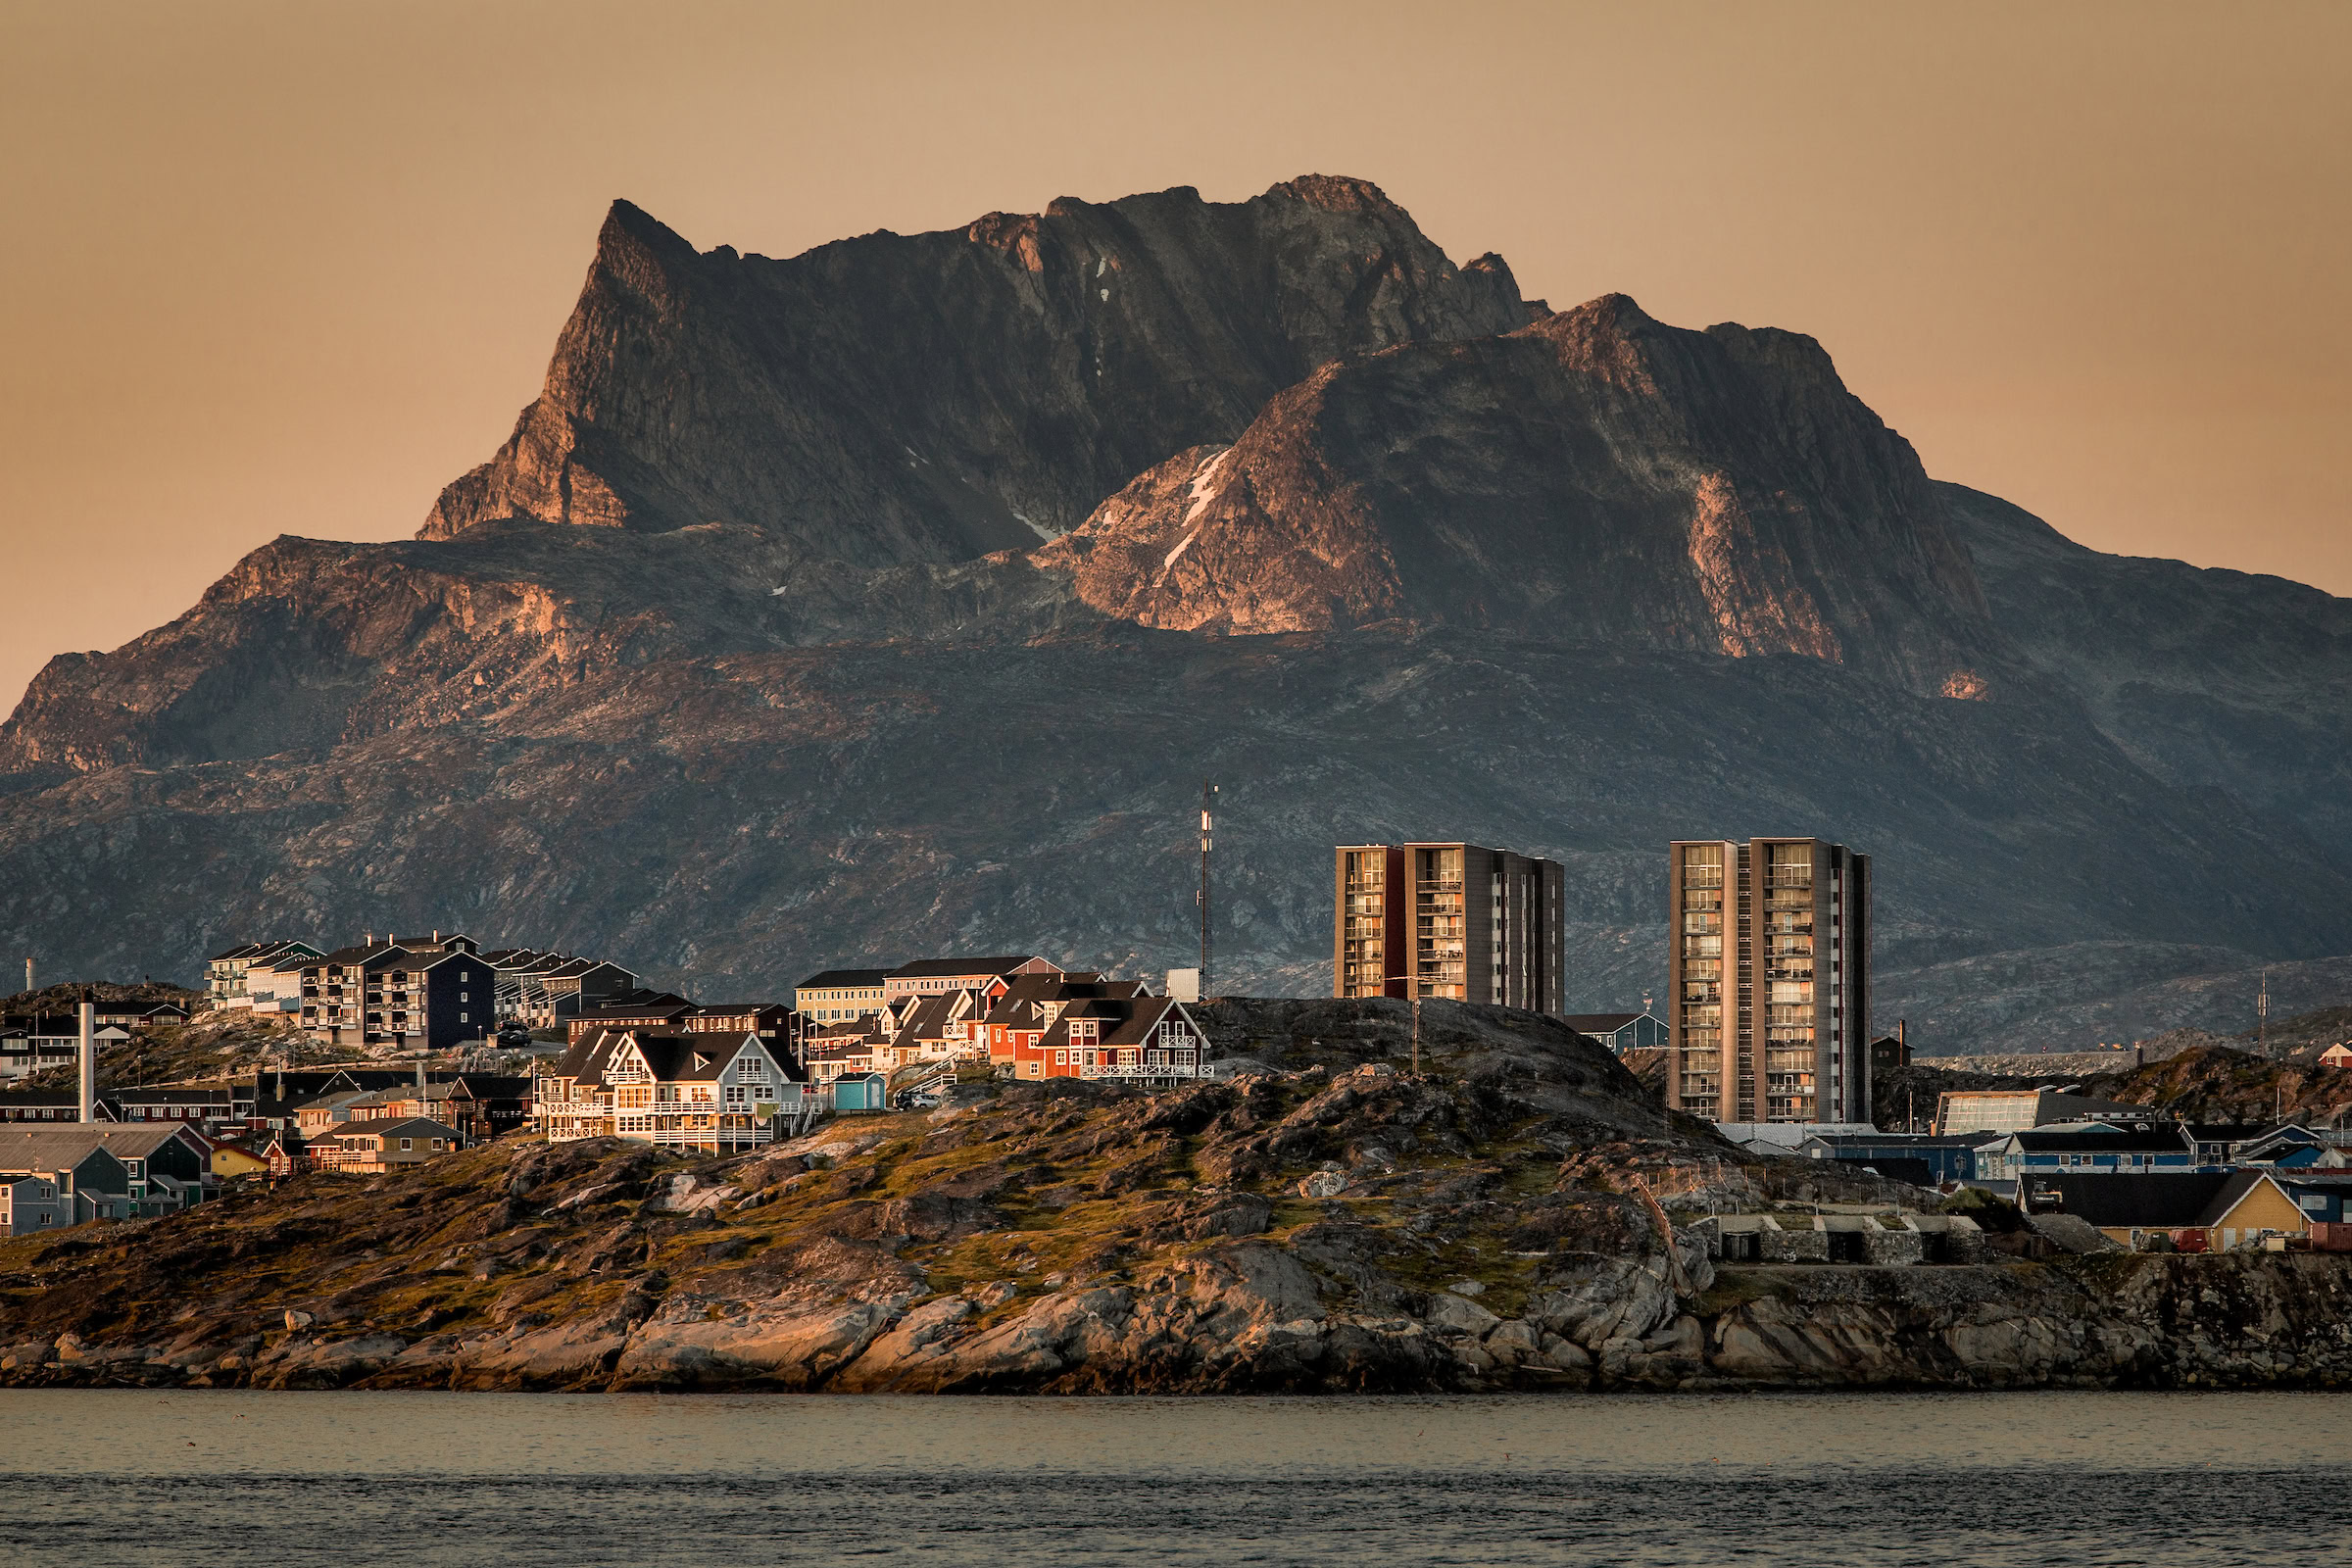 Buildings in Nuuk with the mountain Sermitsiaq in the background at sunset in Greenland - Visit Greenland photo database